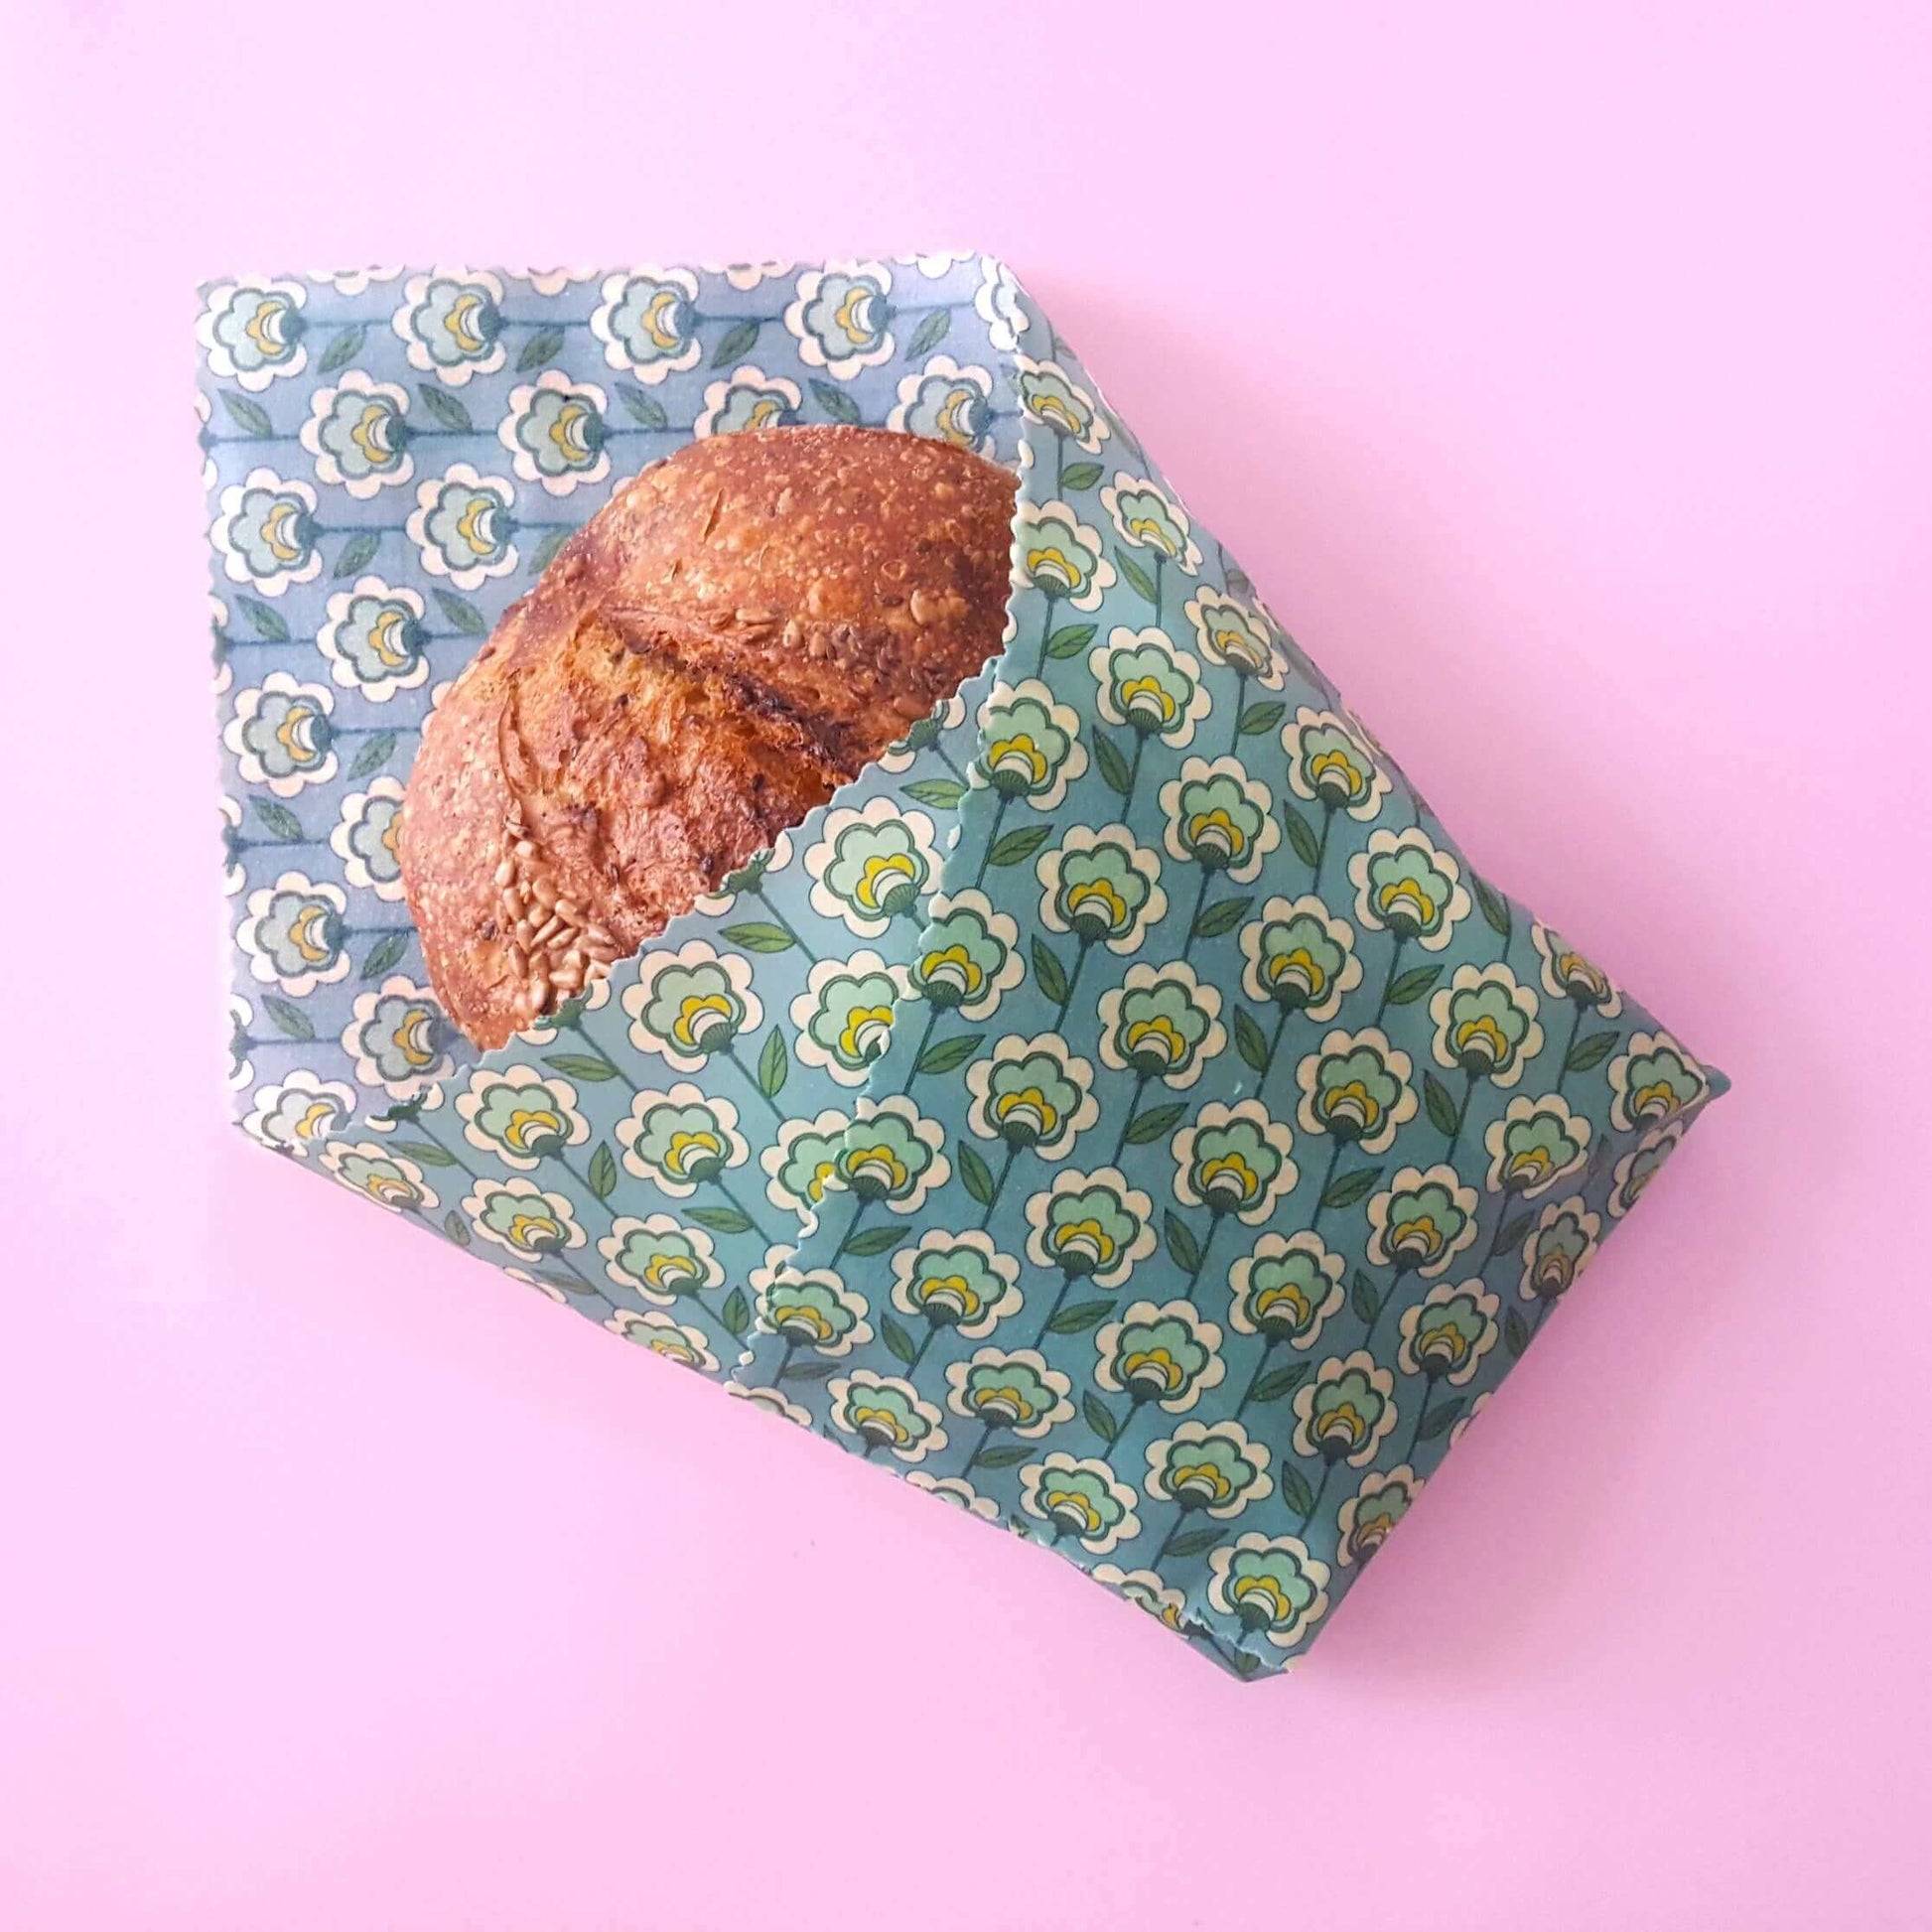 Reusable Beeswax Food Wraps 100% Hand Made in the UK by Honey Bee Good shown in XXL Bread